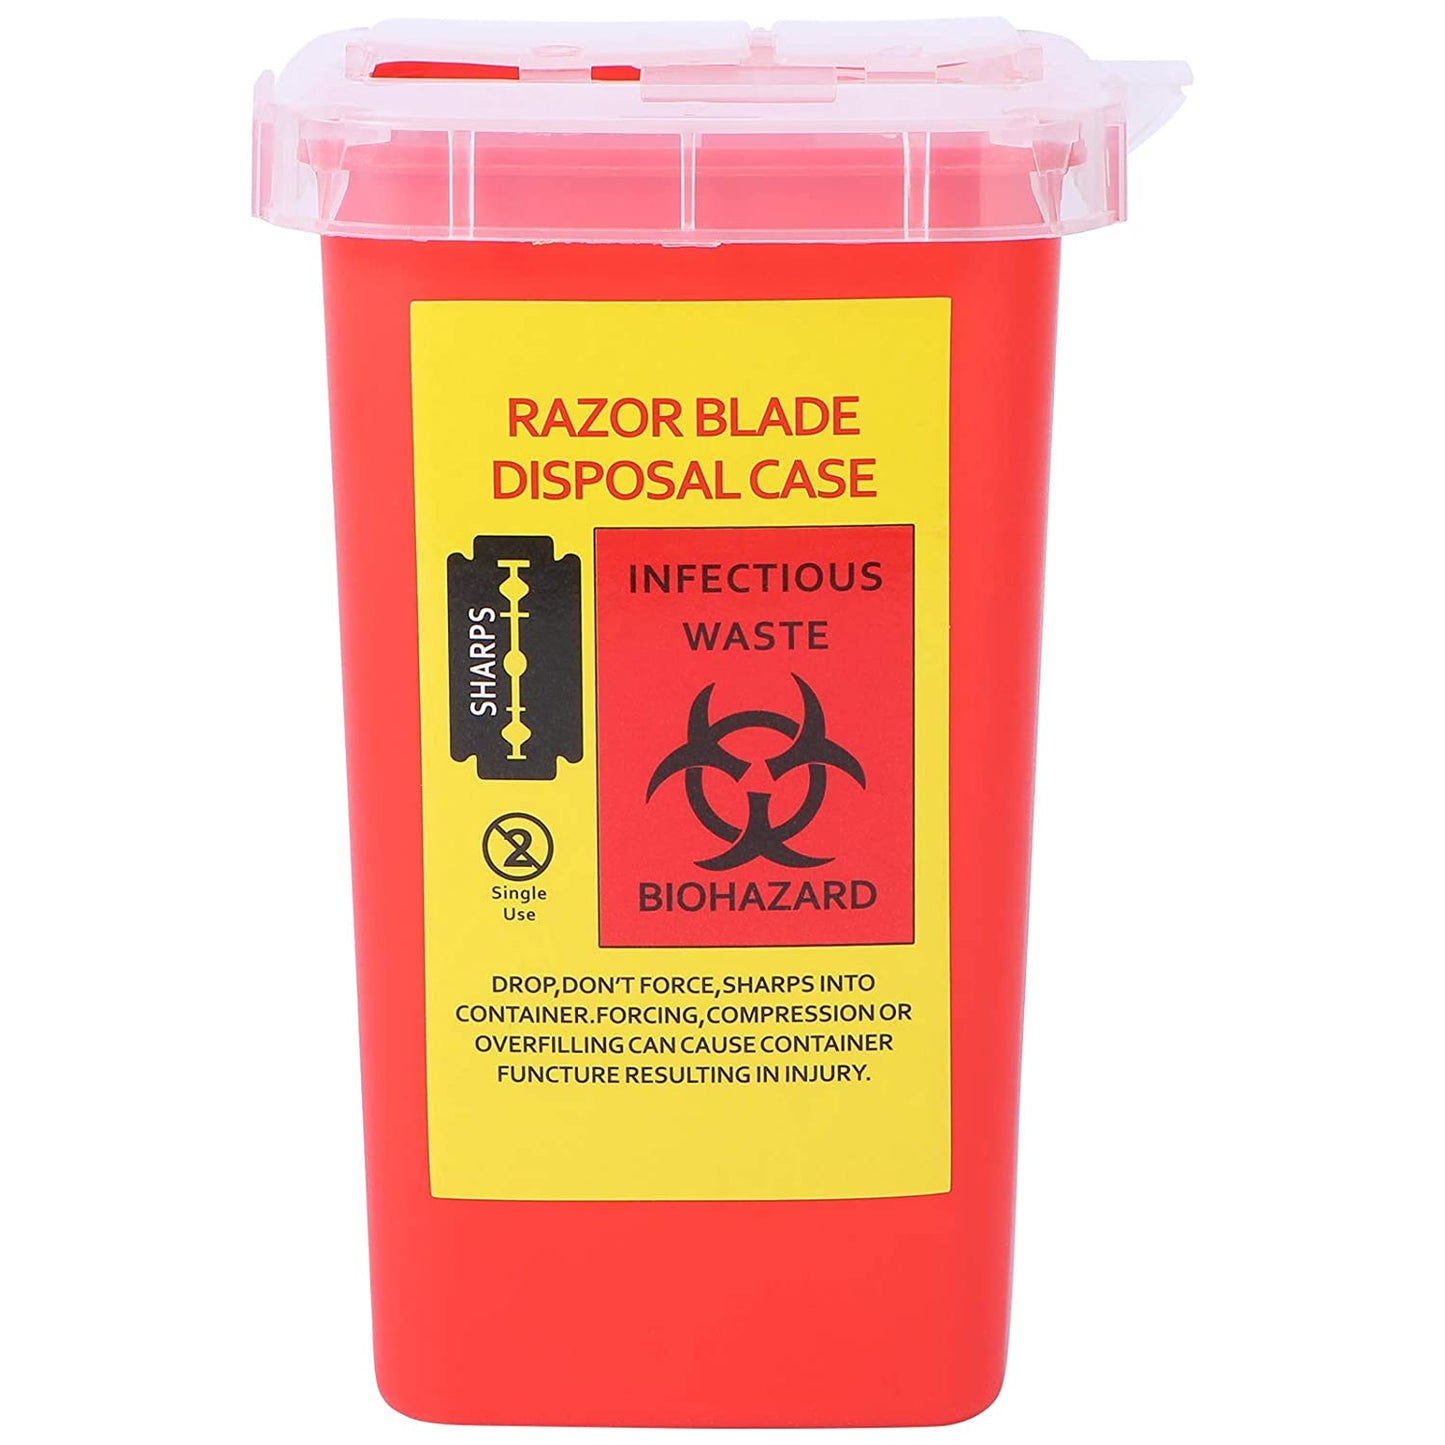 Used Razor blades disposal Sharps container